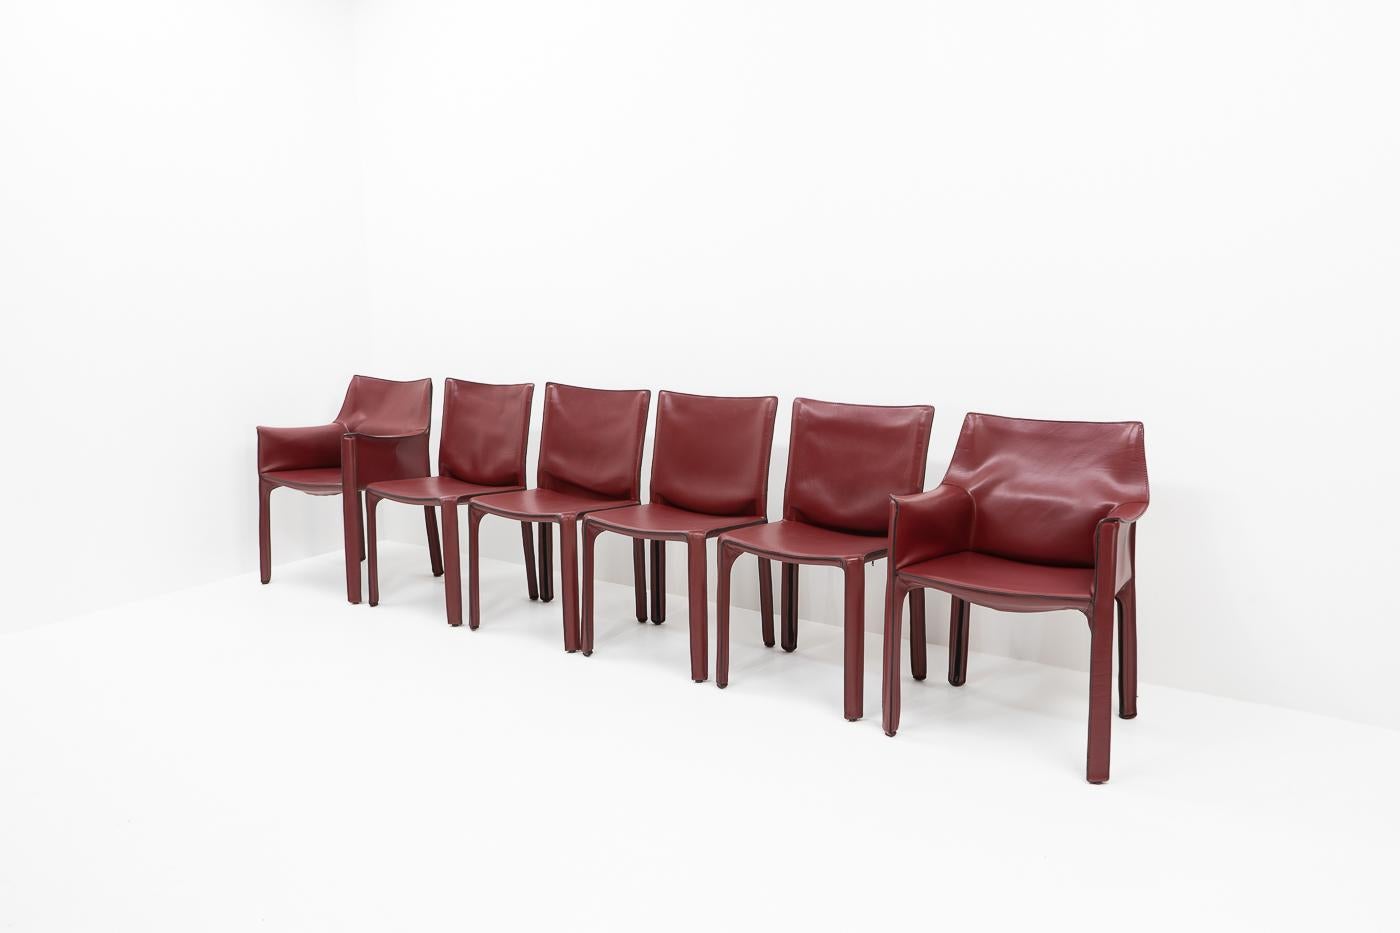 Set of two Cab 413 armchairs and four Cab 412 side chairs in red leather by Mario Bellini for Cassina.


These very comfortable lounge chairs are built up with a tubular steel frame over which foam and thick saddle leather is fitted. The leather